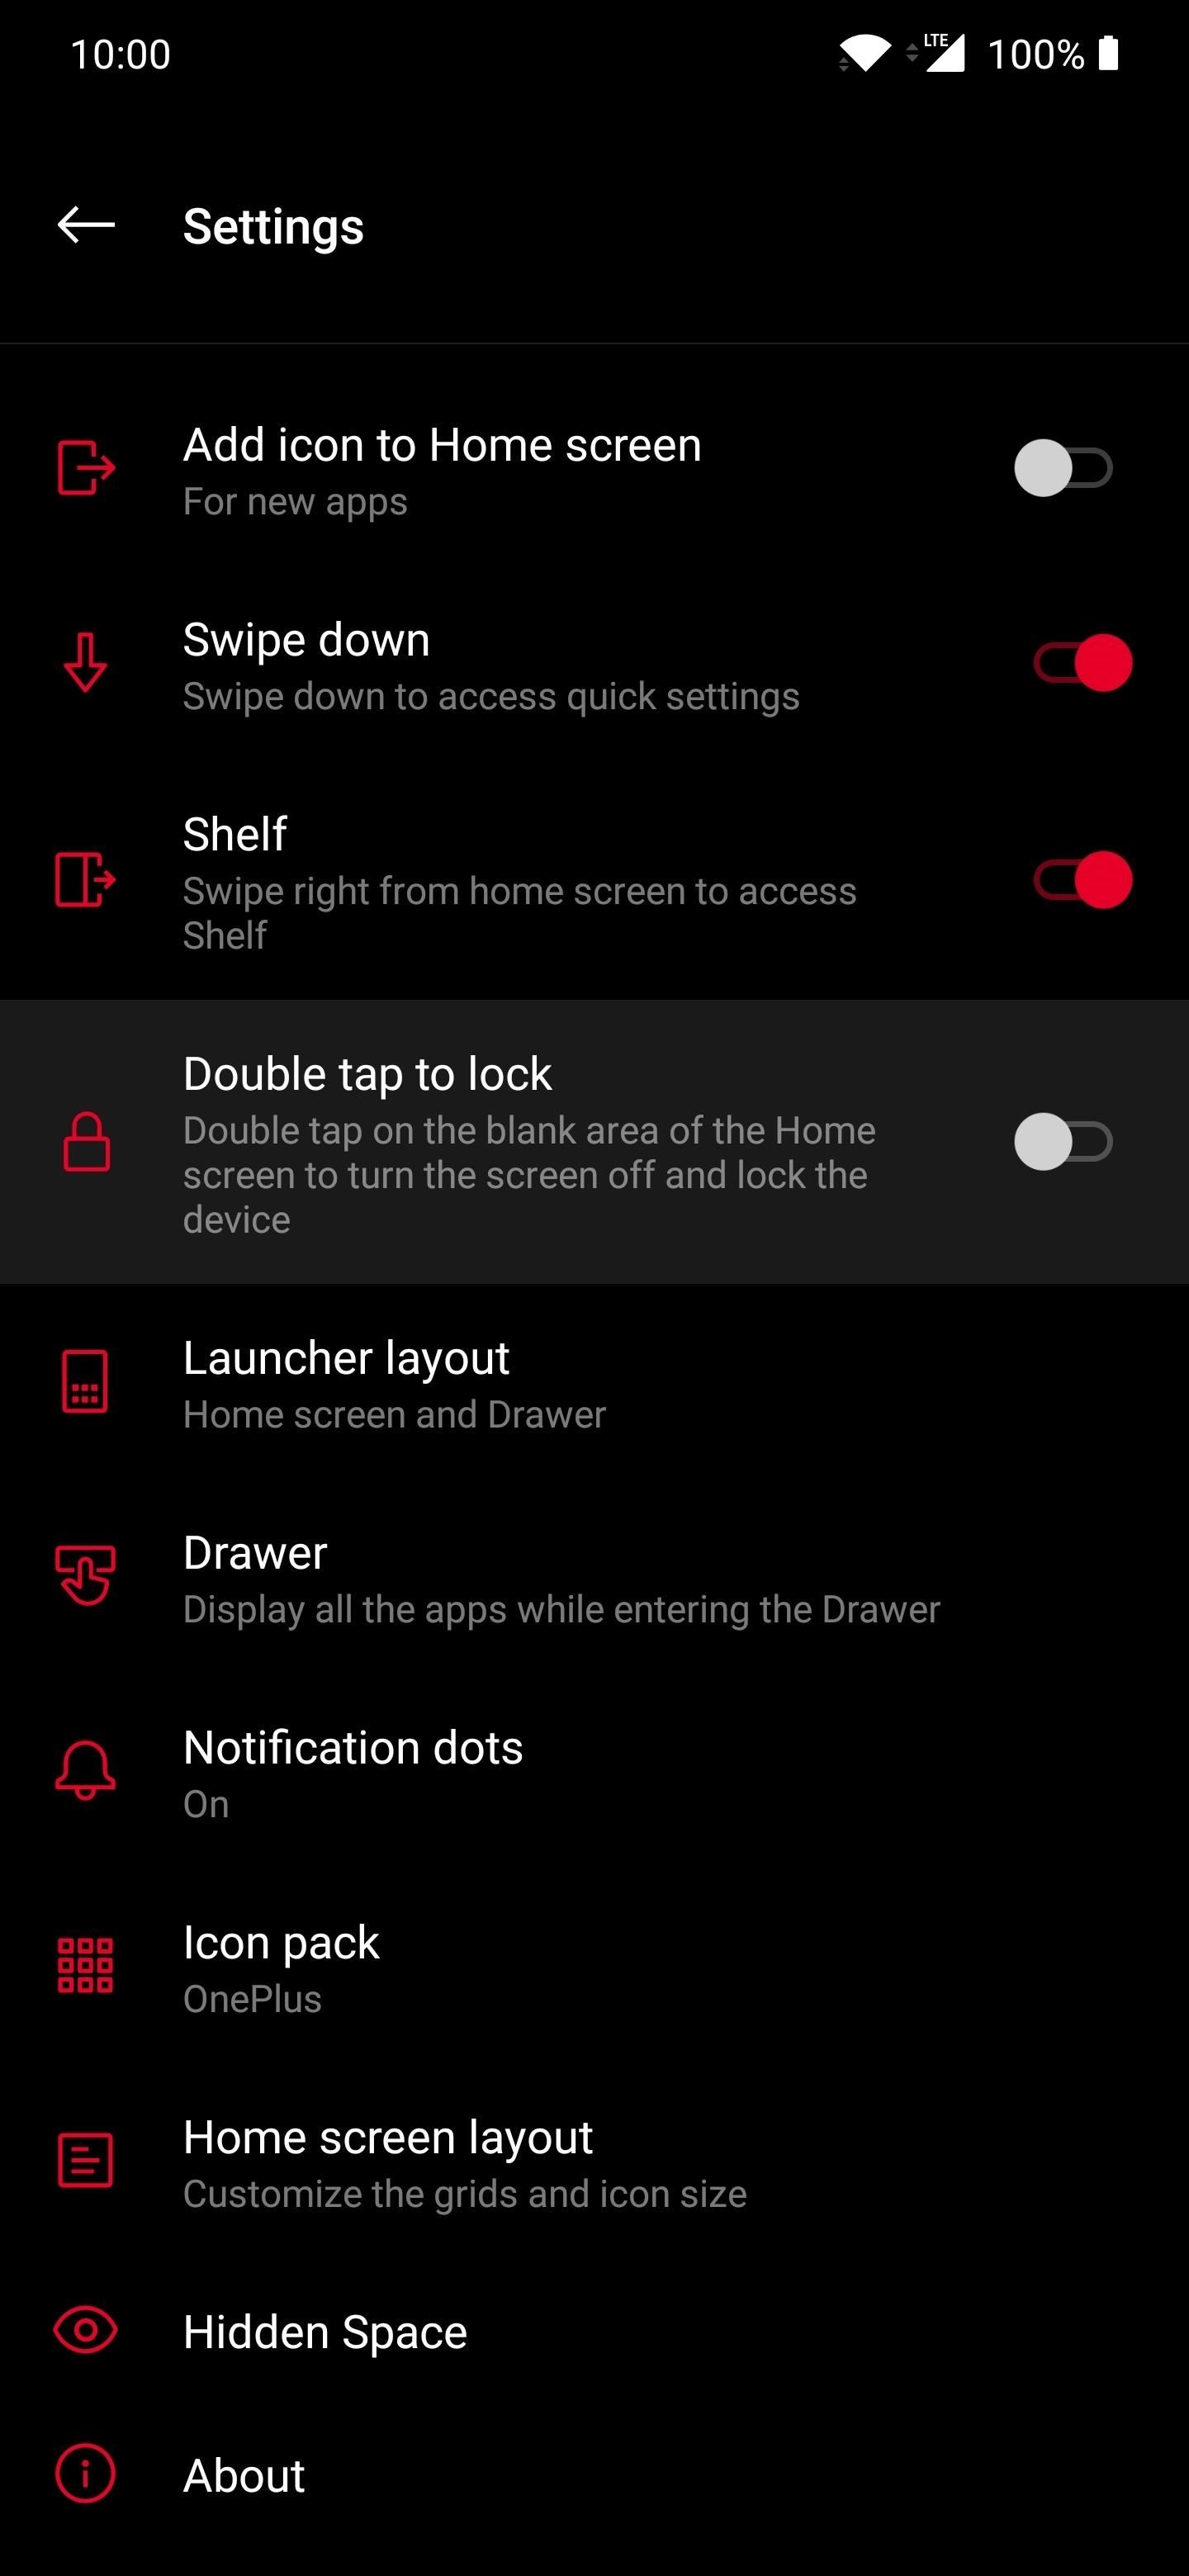 You Can Double Tap Your Home Screen to Lock Your OnePlus Phone